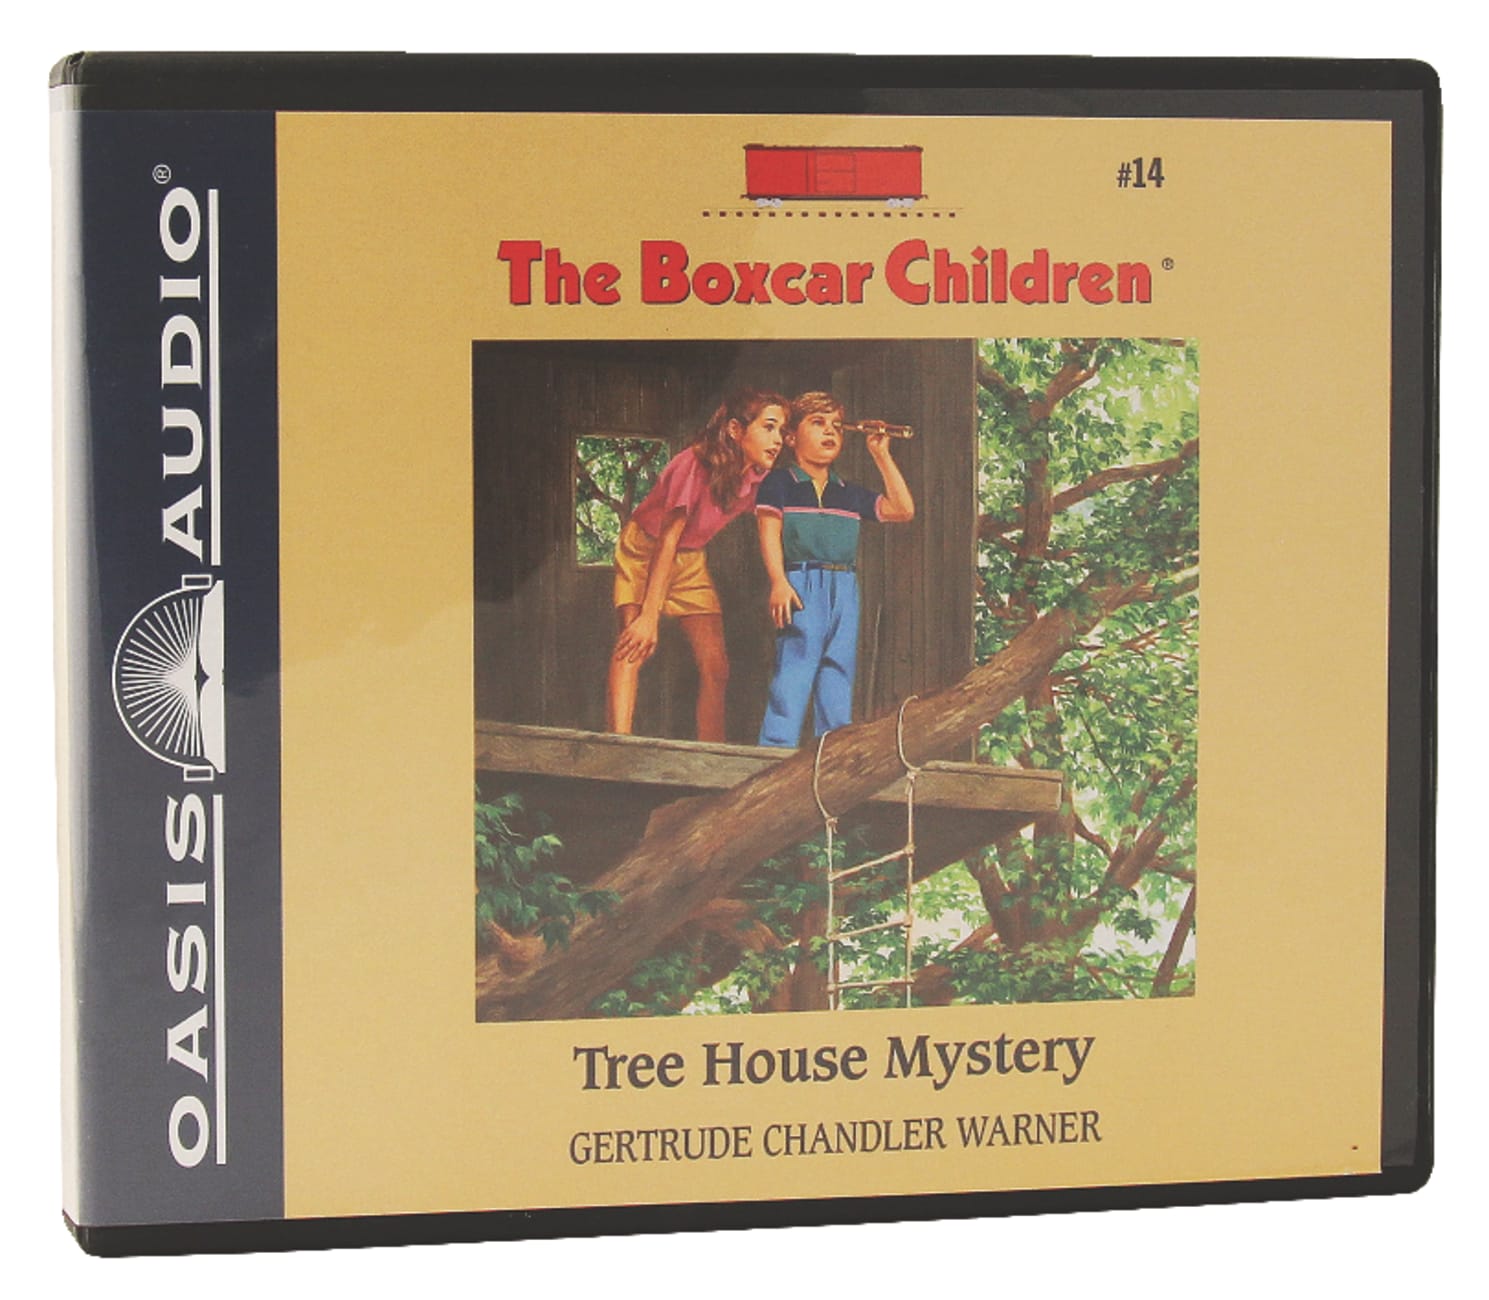 Tree House Mystery (Unabridged, 2 CDS) (#014 in Boxcar Children Audio Series) Compact Disc